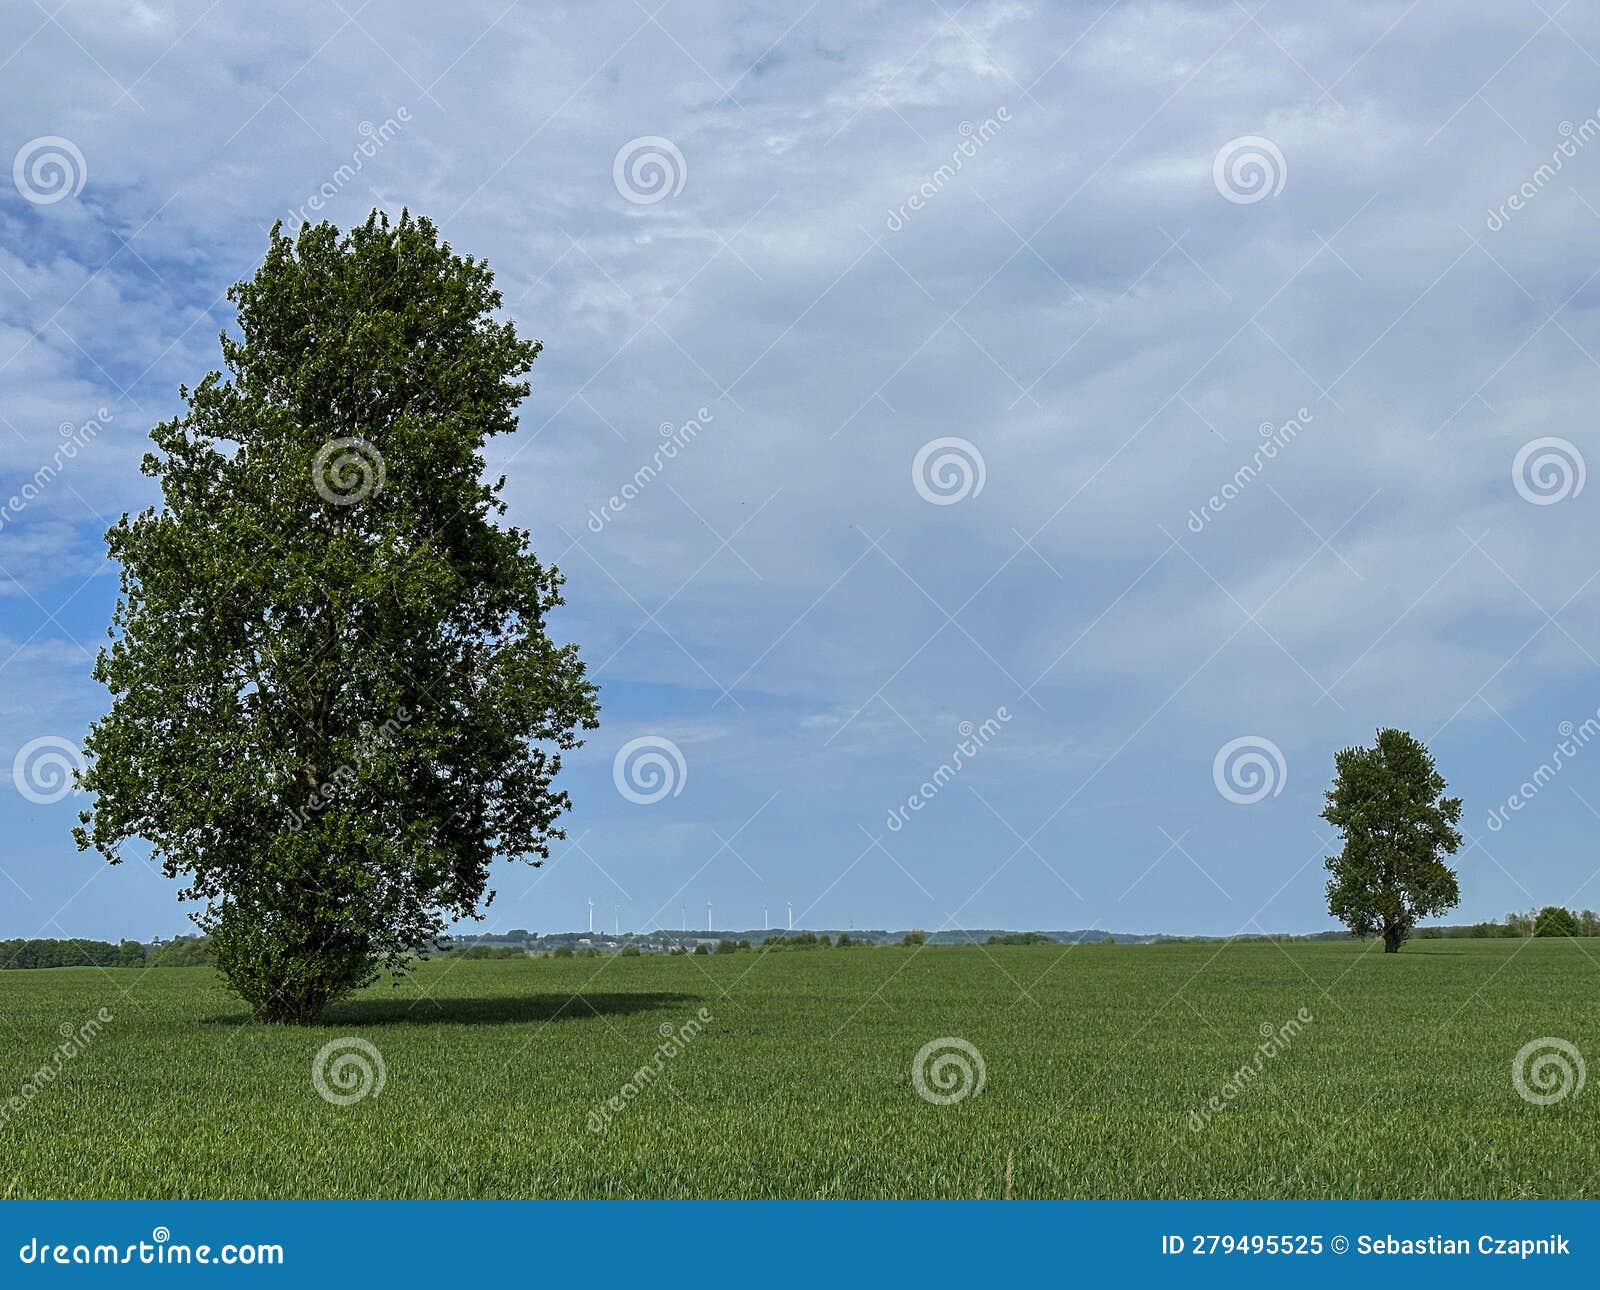 big and small tree, asymmetrical landscape with copyspace, minimalistic image